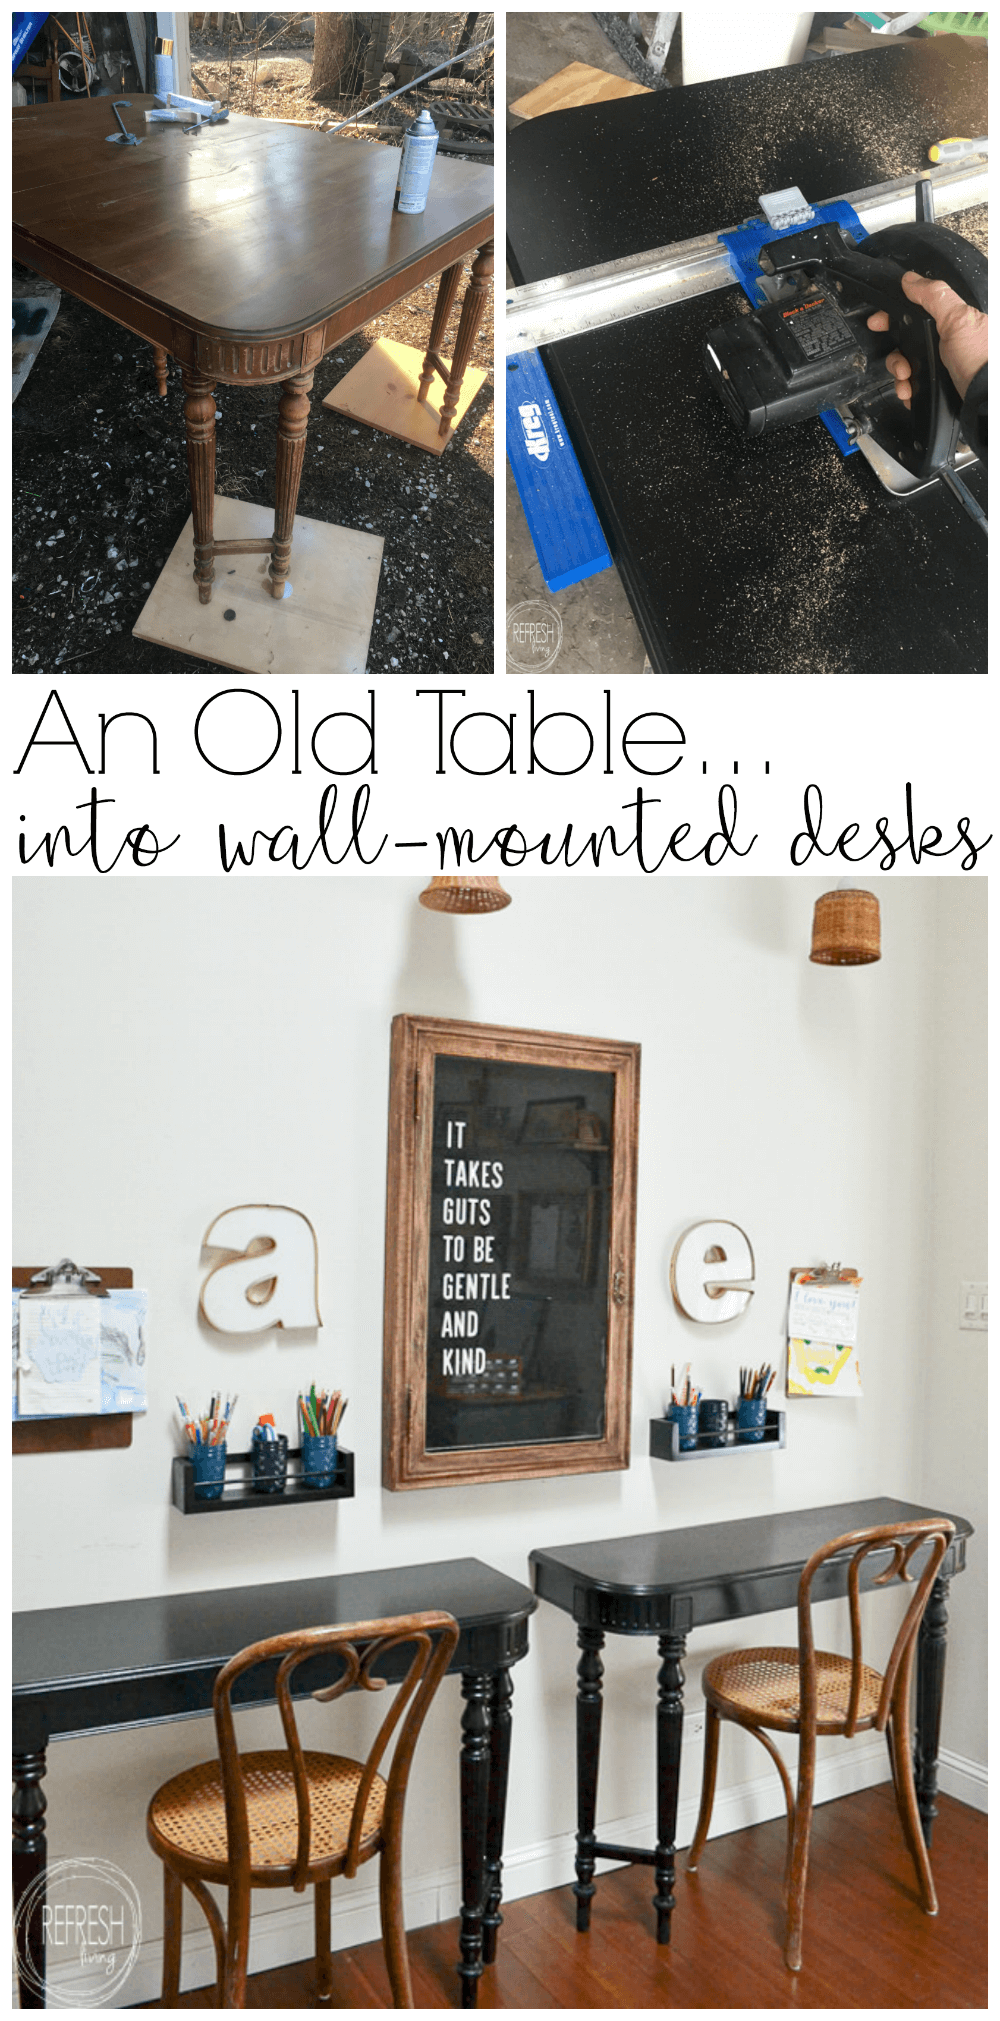 How To Make A Wall Mounted Desk From An Old Table Perfect For Kids